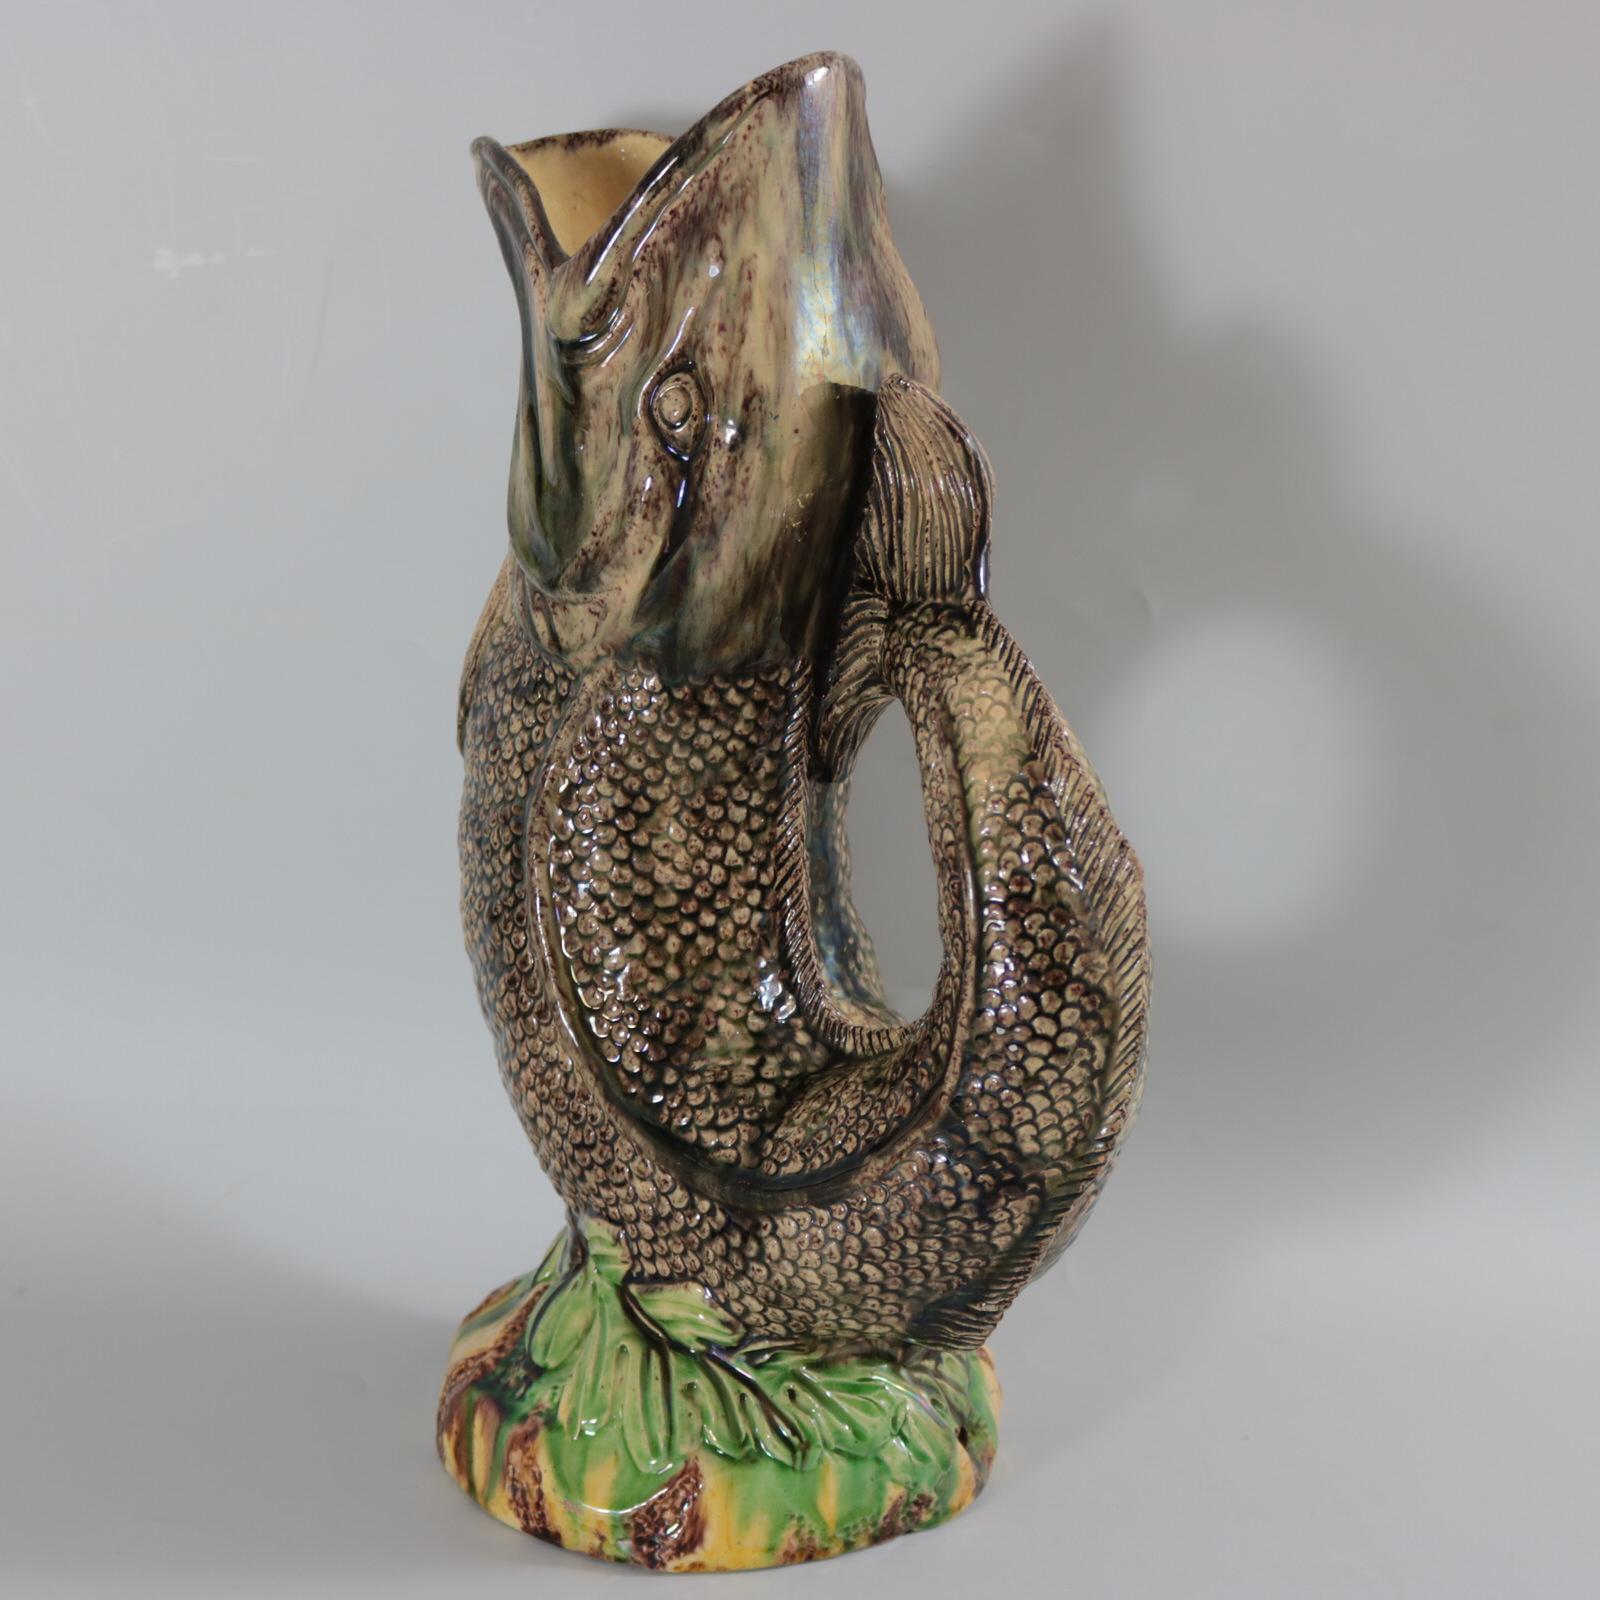 European/Continental Majolica jug/pitcher which features a leaping fish, mouth wide open, on a bed
of leaves. Colouration: grey, green, yellow, are predominant.